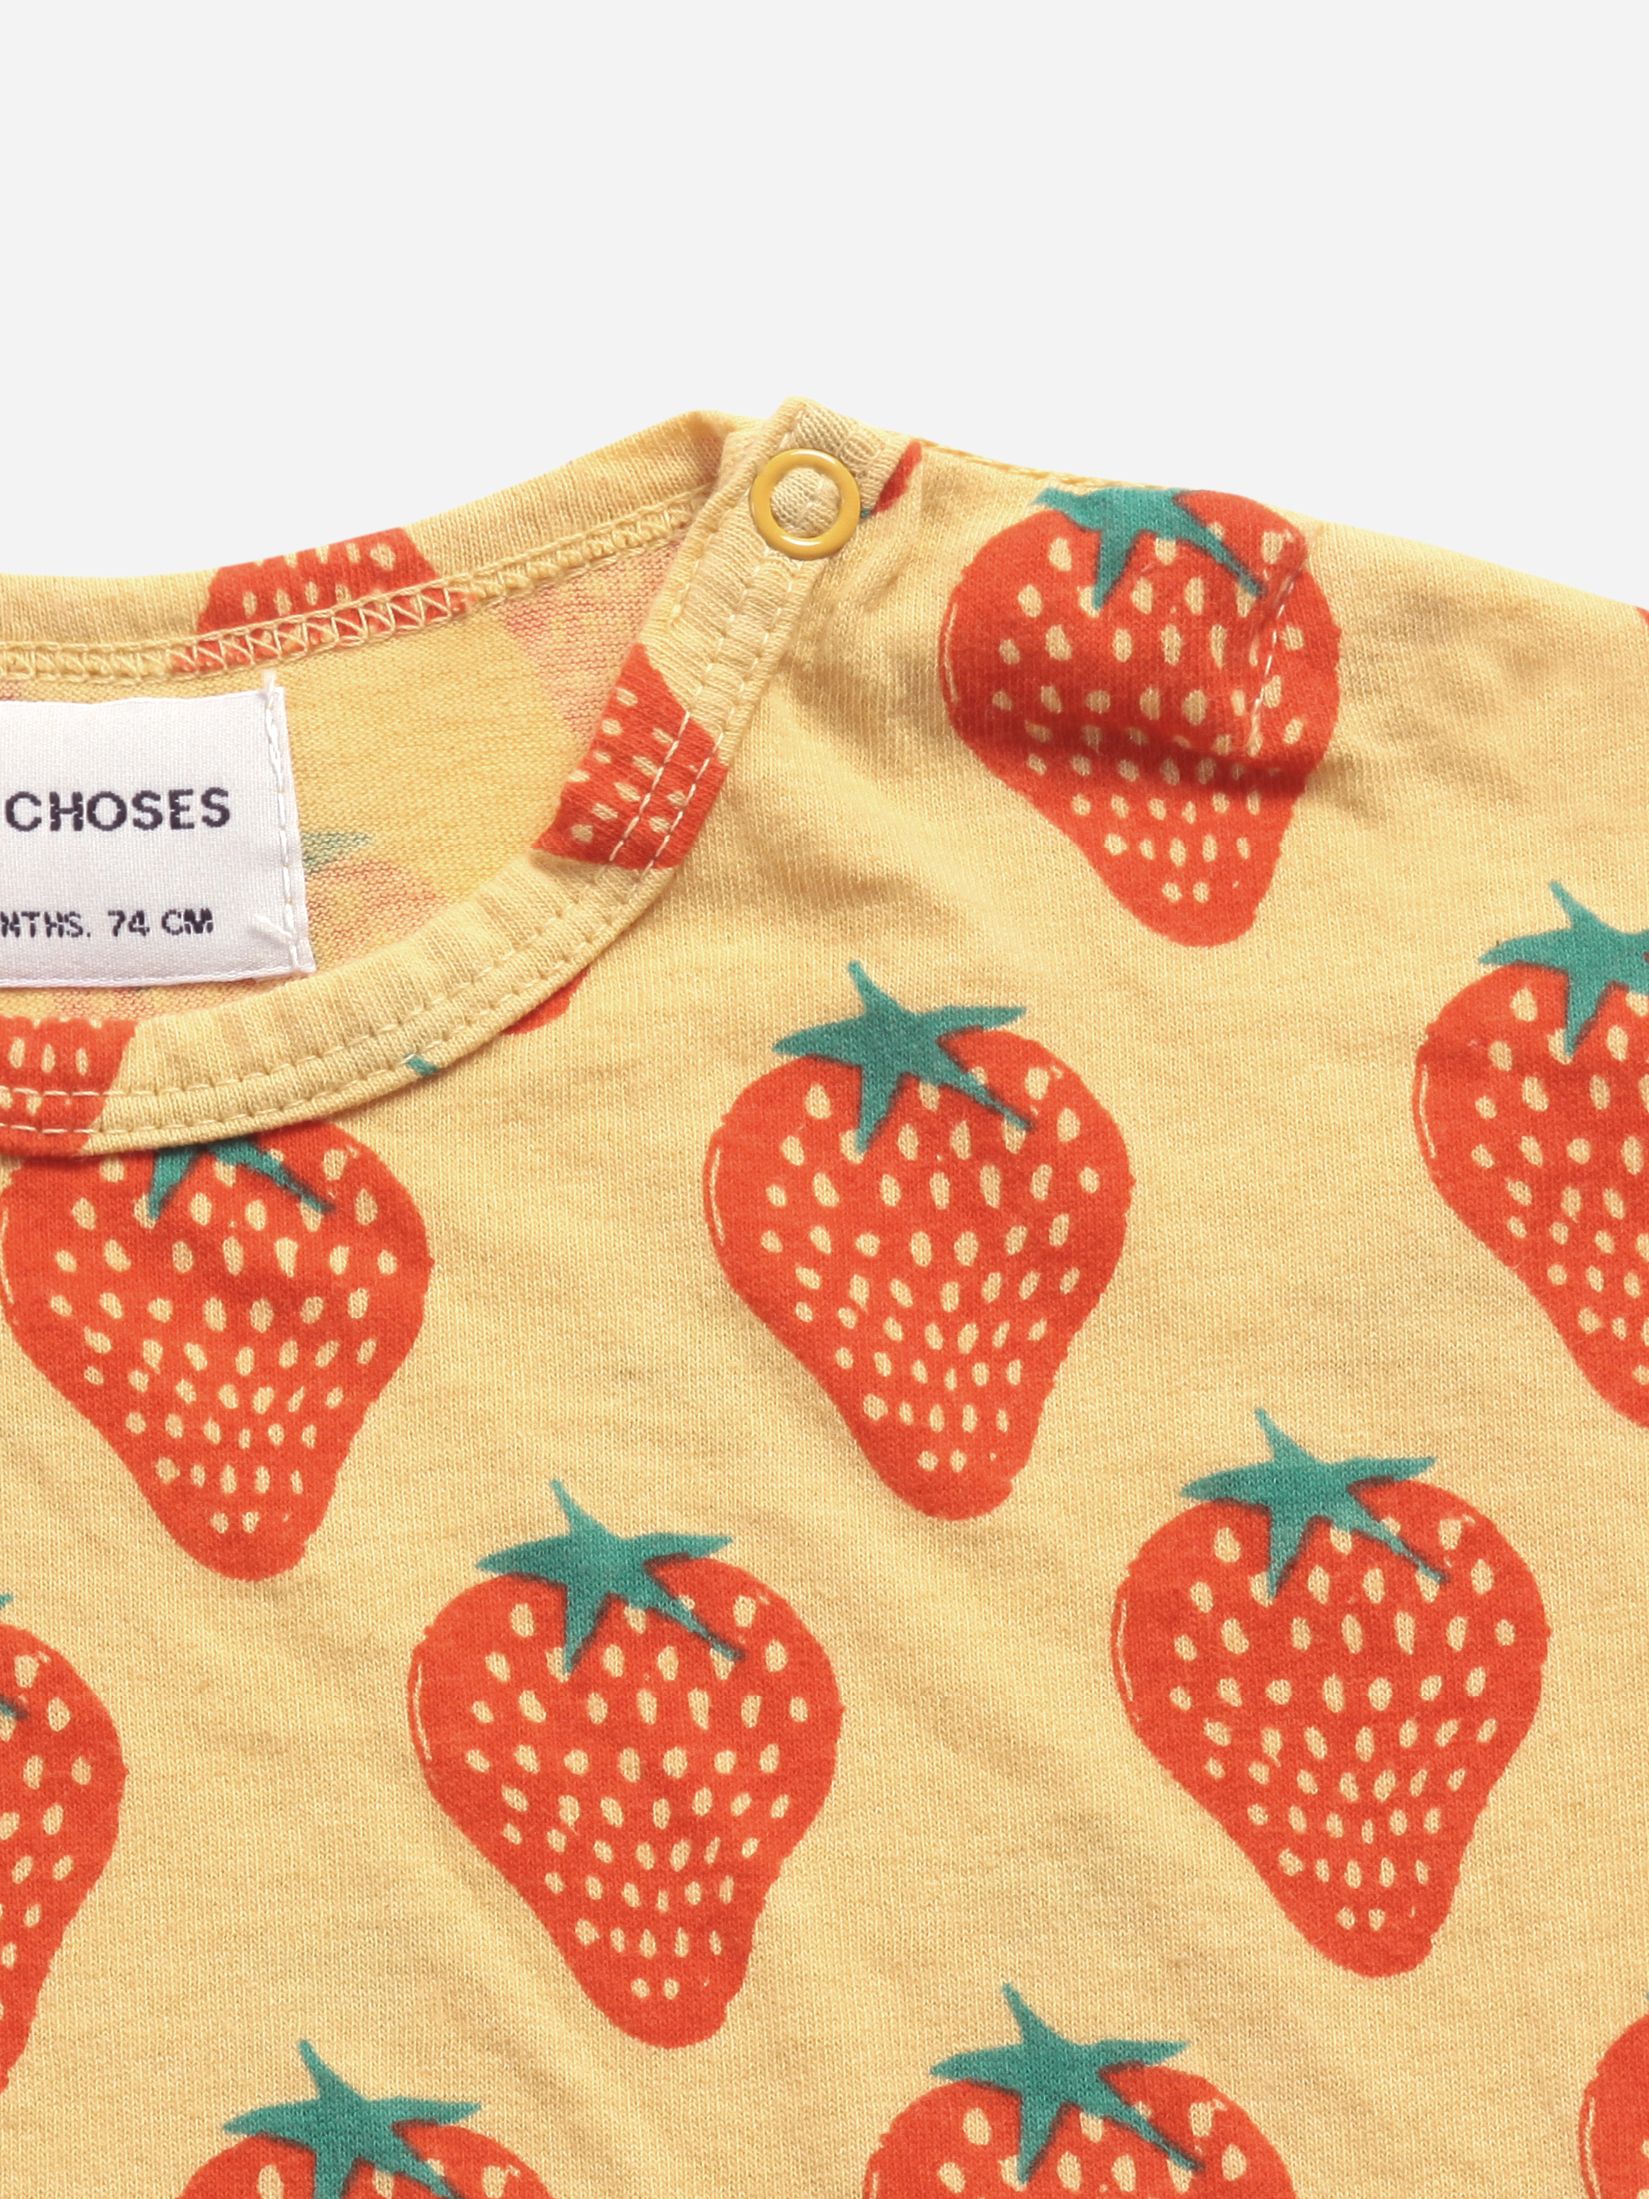 T-Shirt Strawberry all over short sleeve 